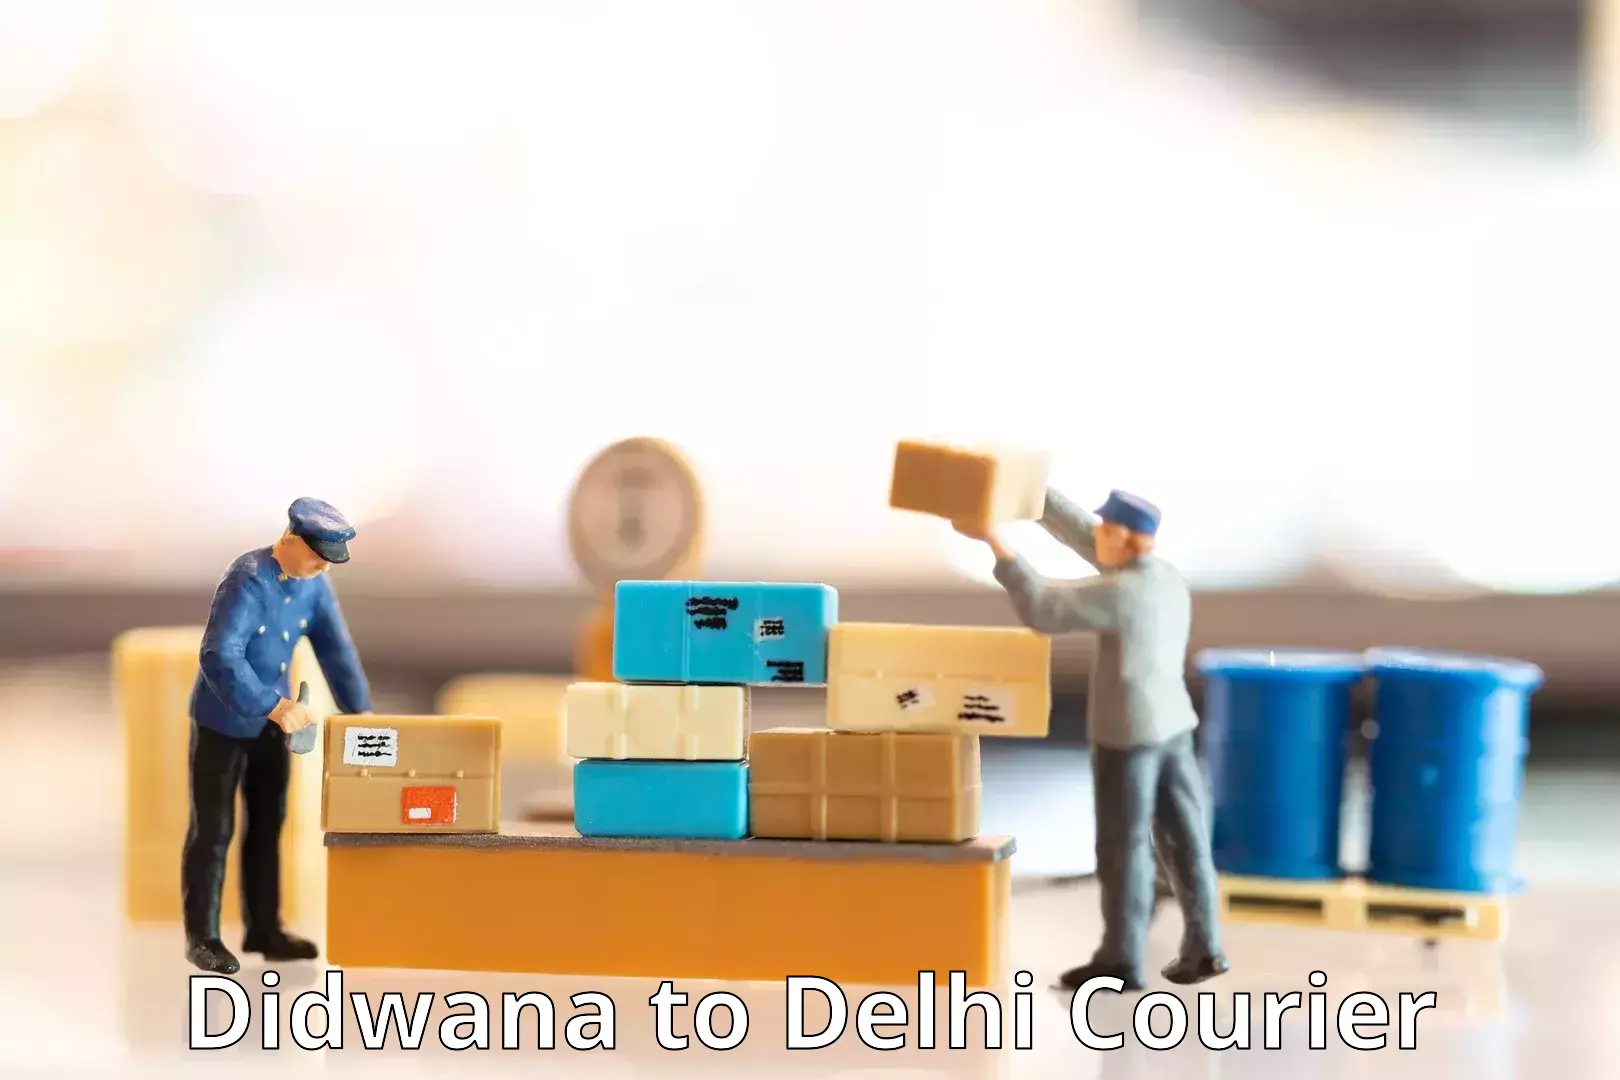 State-of-the-art courier technology in Didwana to Delhi